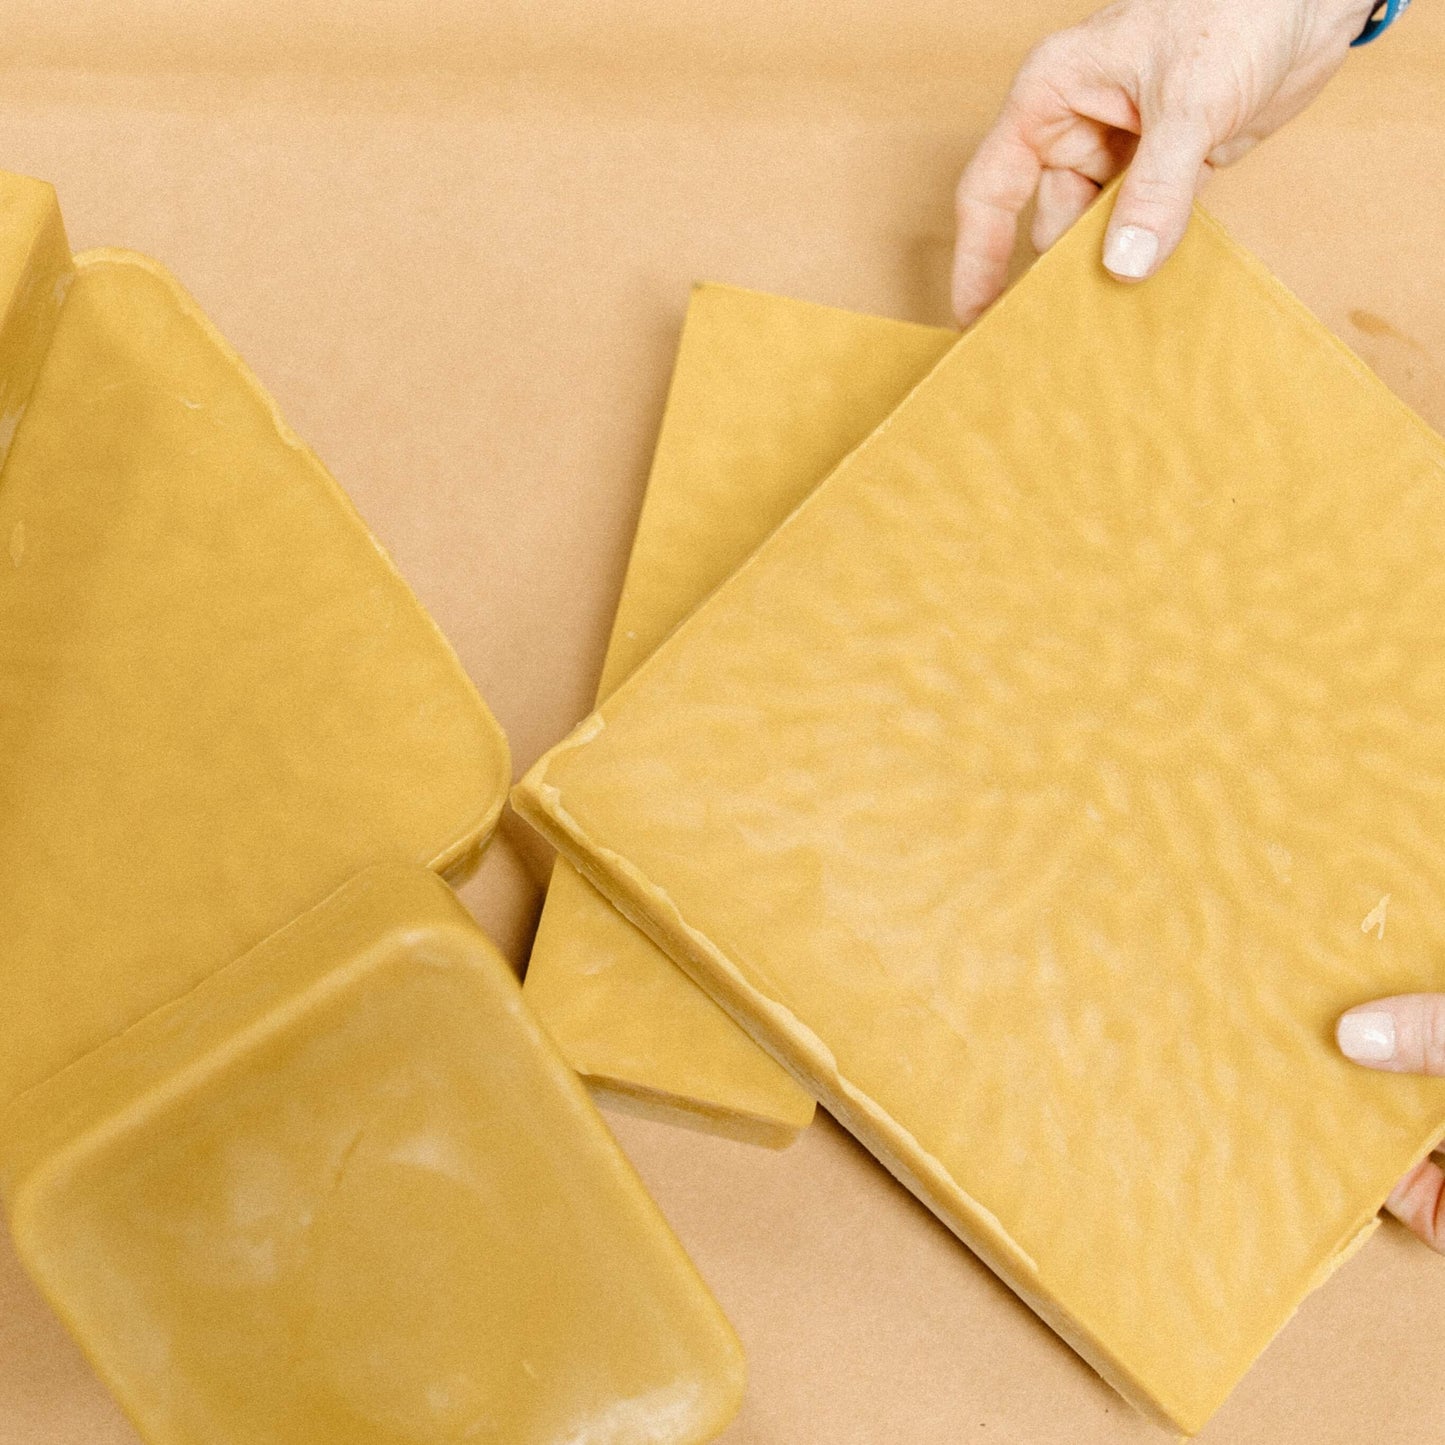 A pile of yellow beeswax blocks.